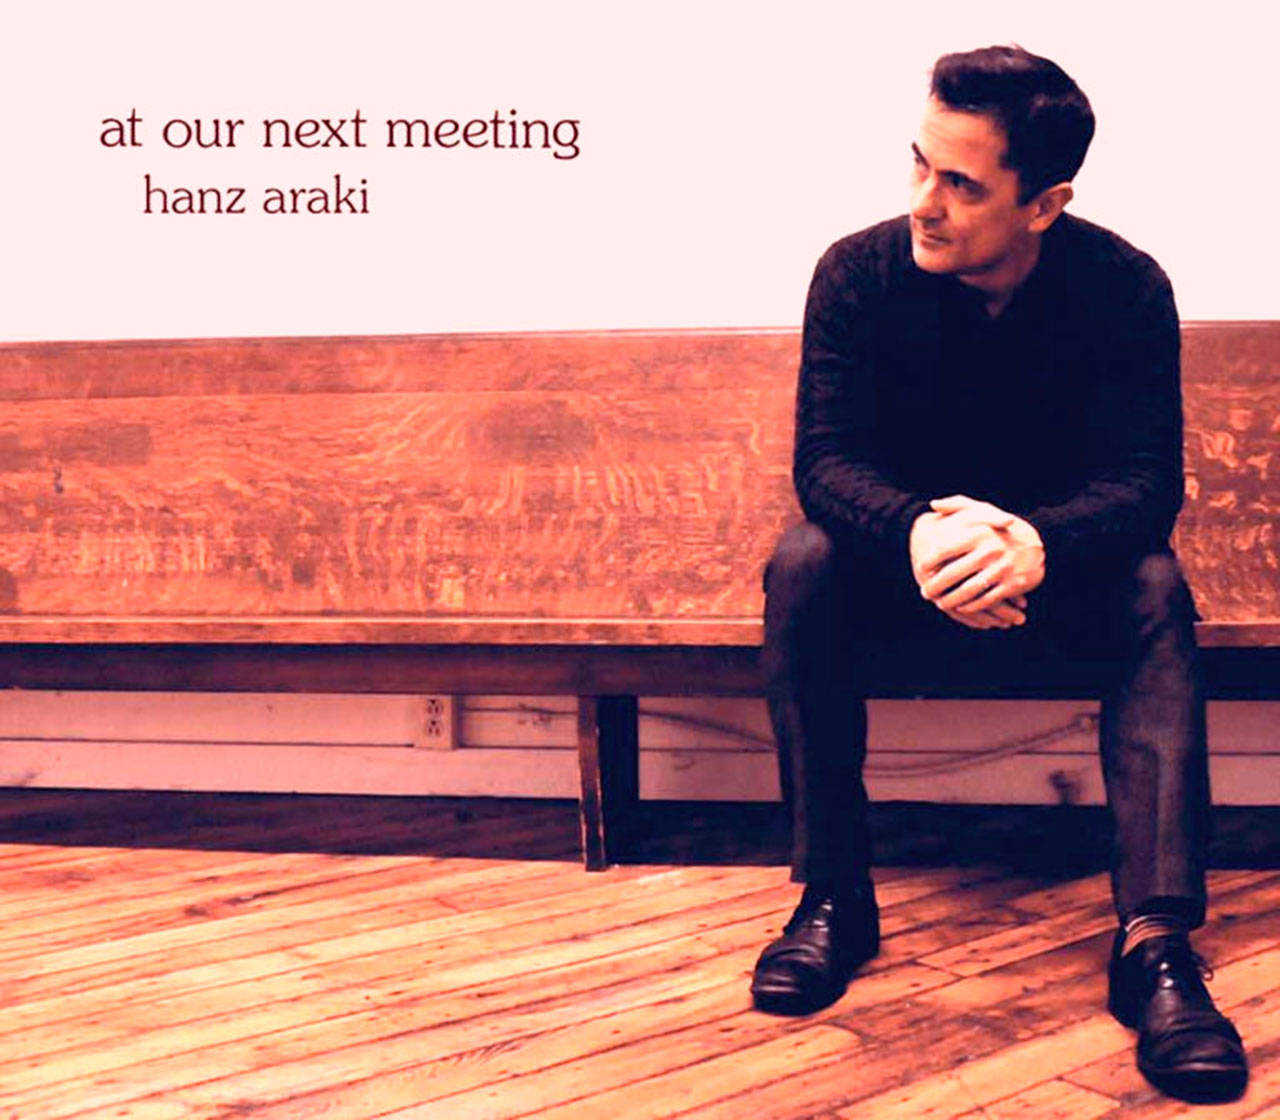 Image courtesy of the Treehouse Café | Singer-songwriter, and traditional Irish flute player, Hanz Araki will celebrate the release of his new album “At Our Next Meeting” at the Treehouse Café at 7:30 p.m. Thursday, June 13.